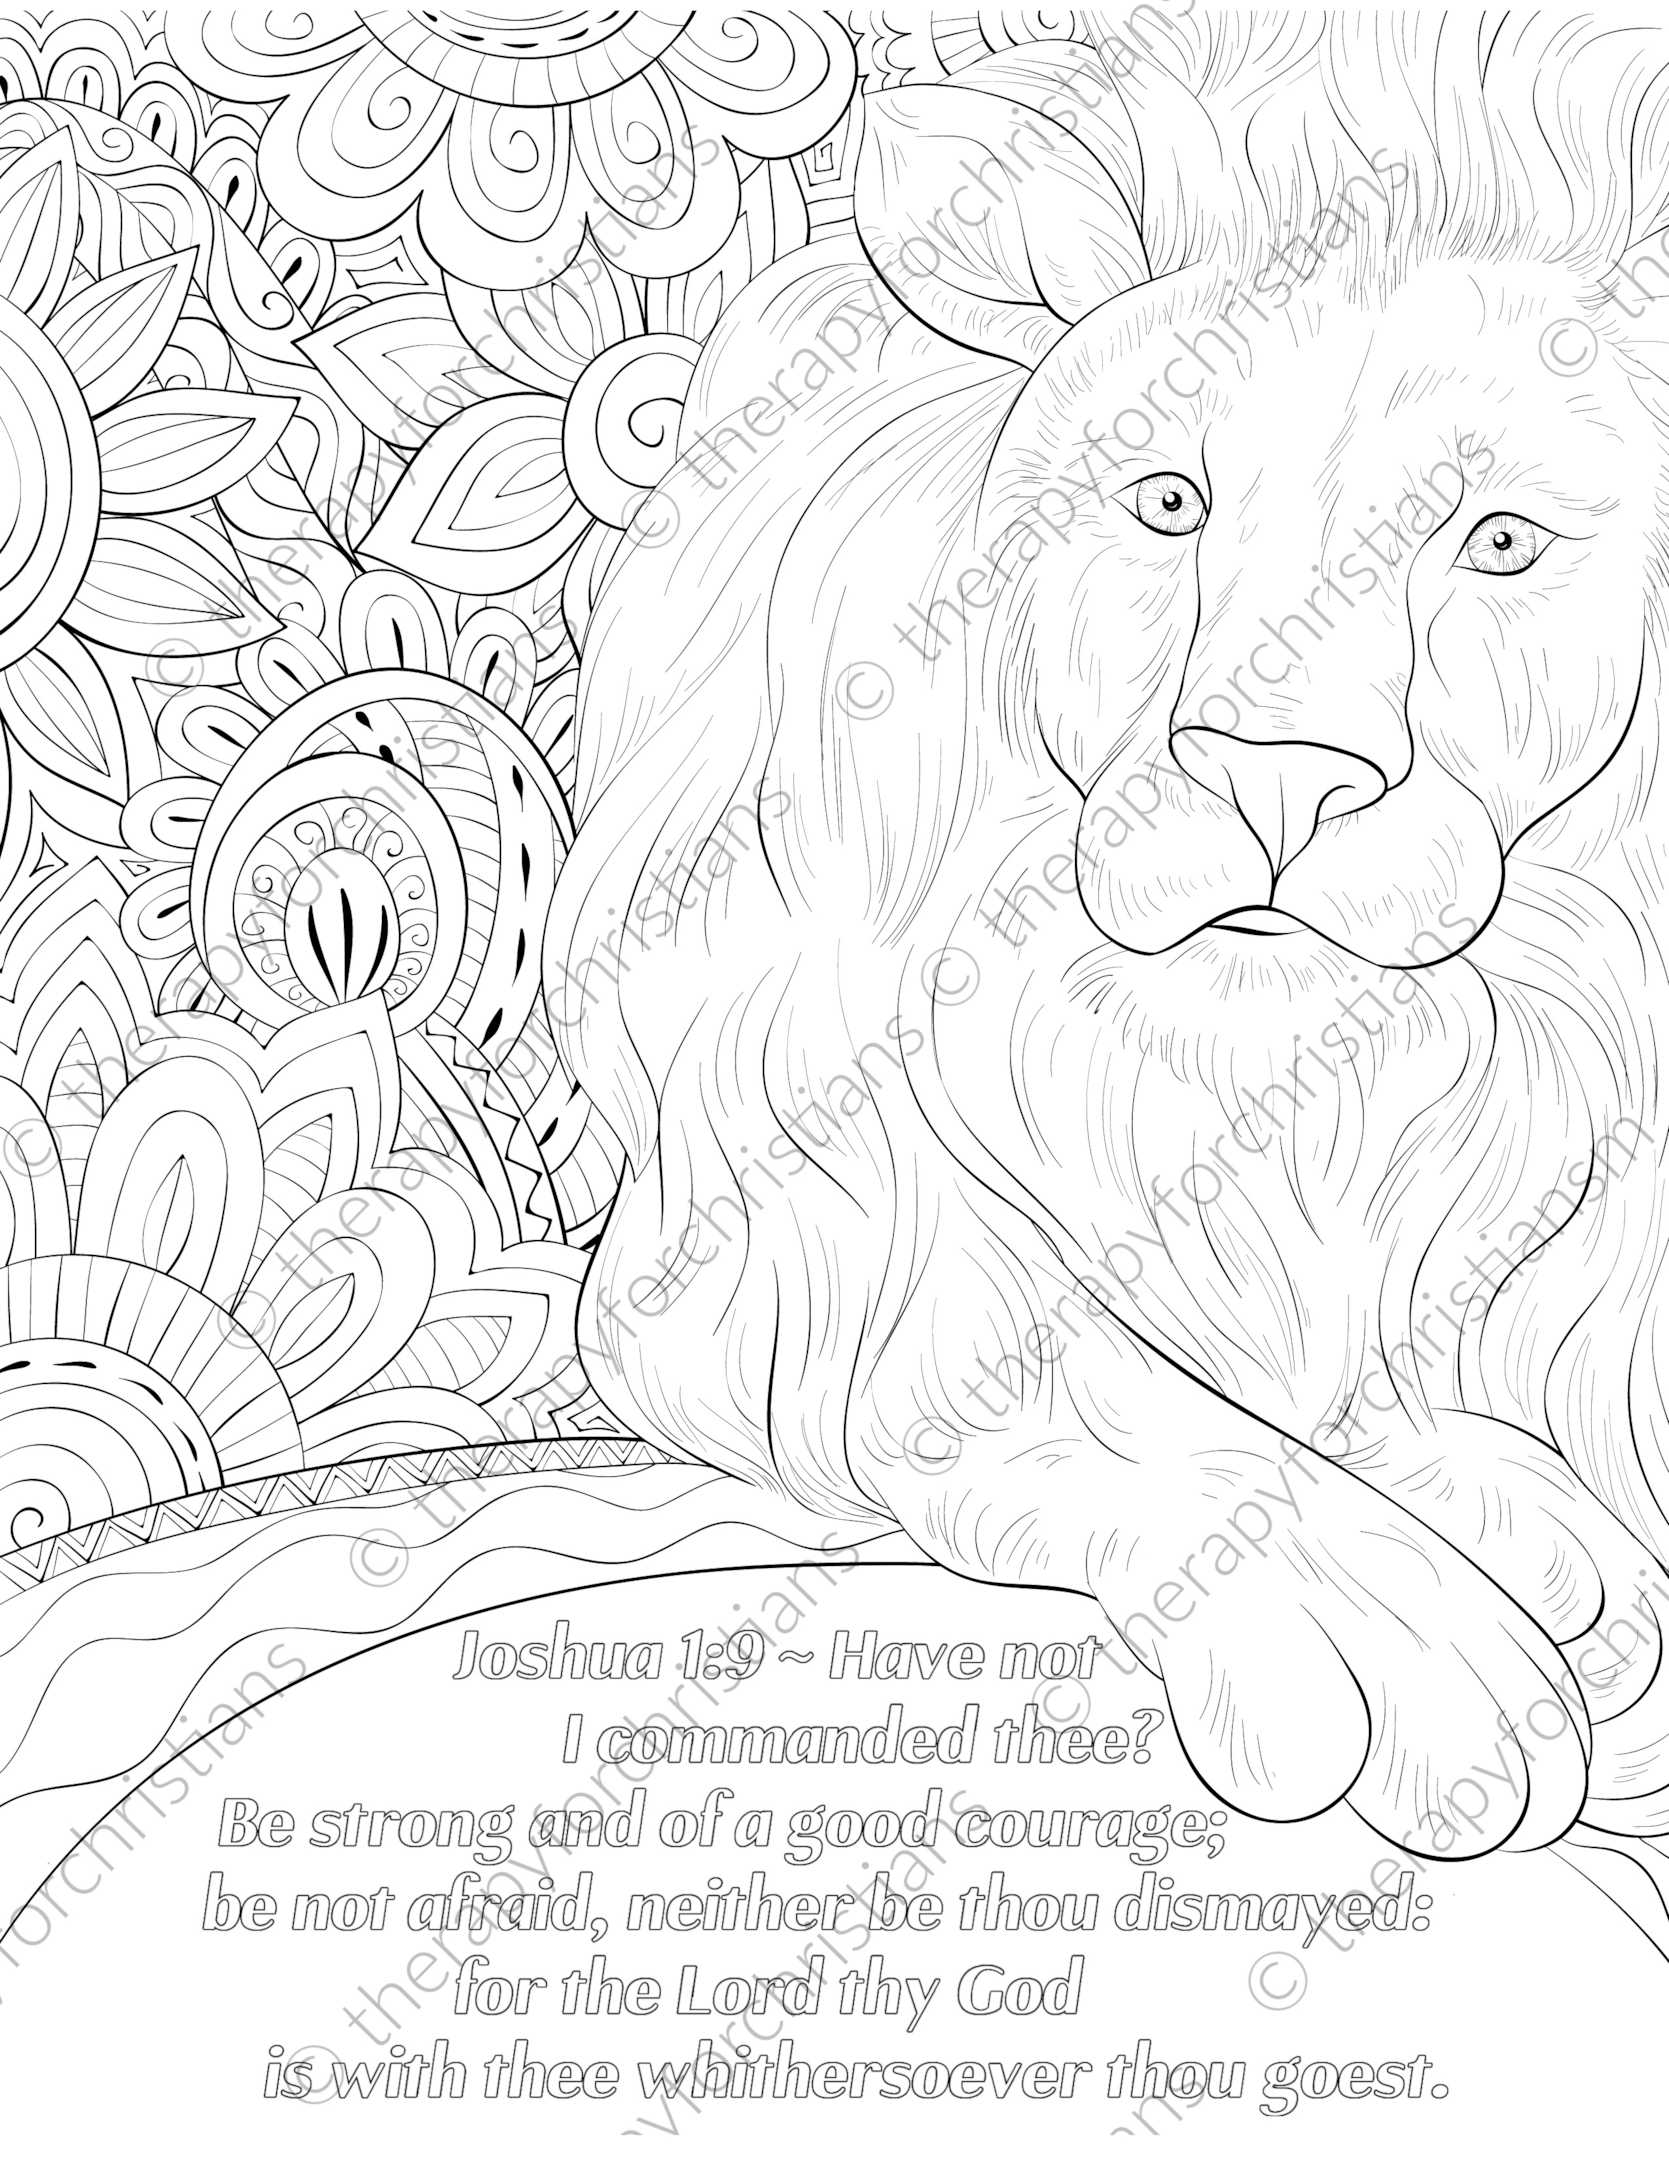 Joshua 1:9 Bible verse coloring pages